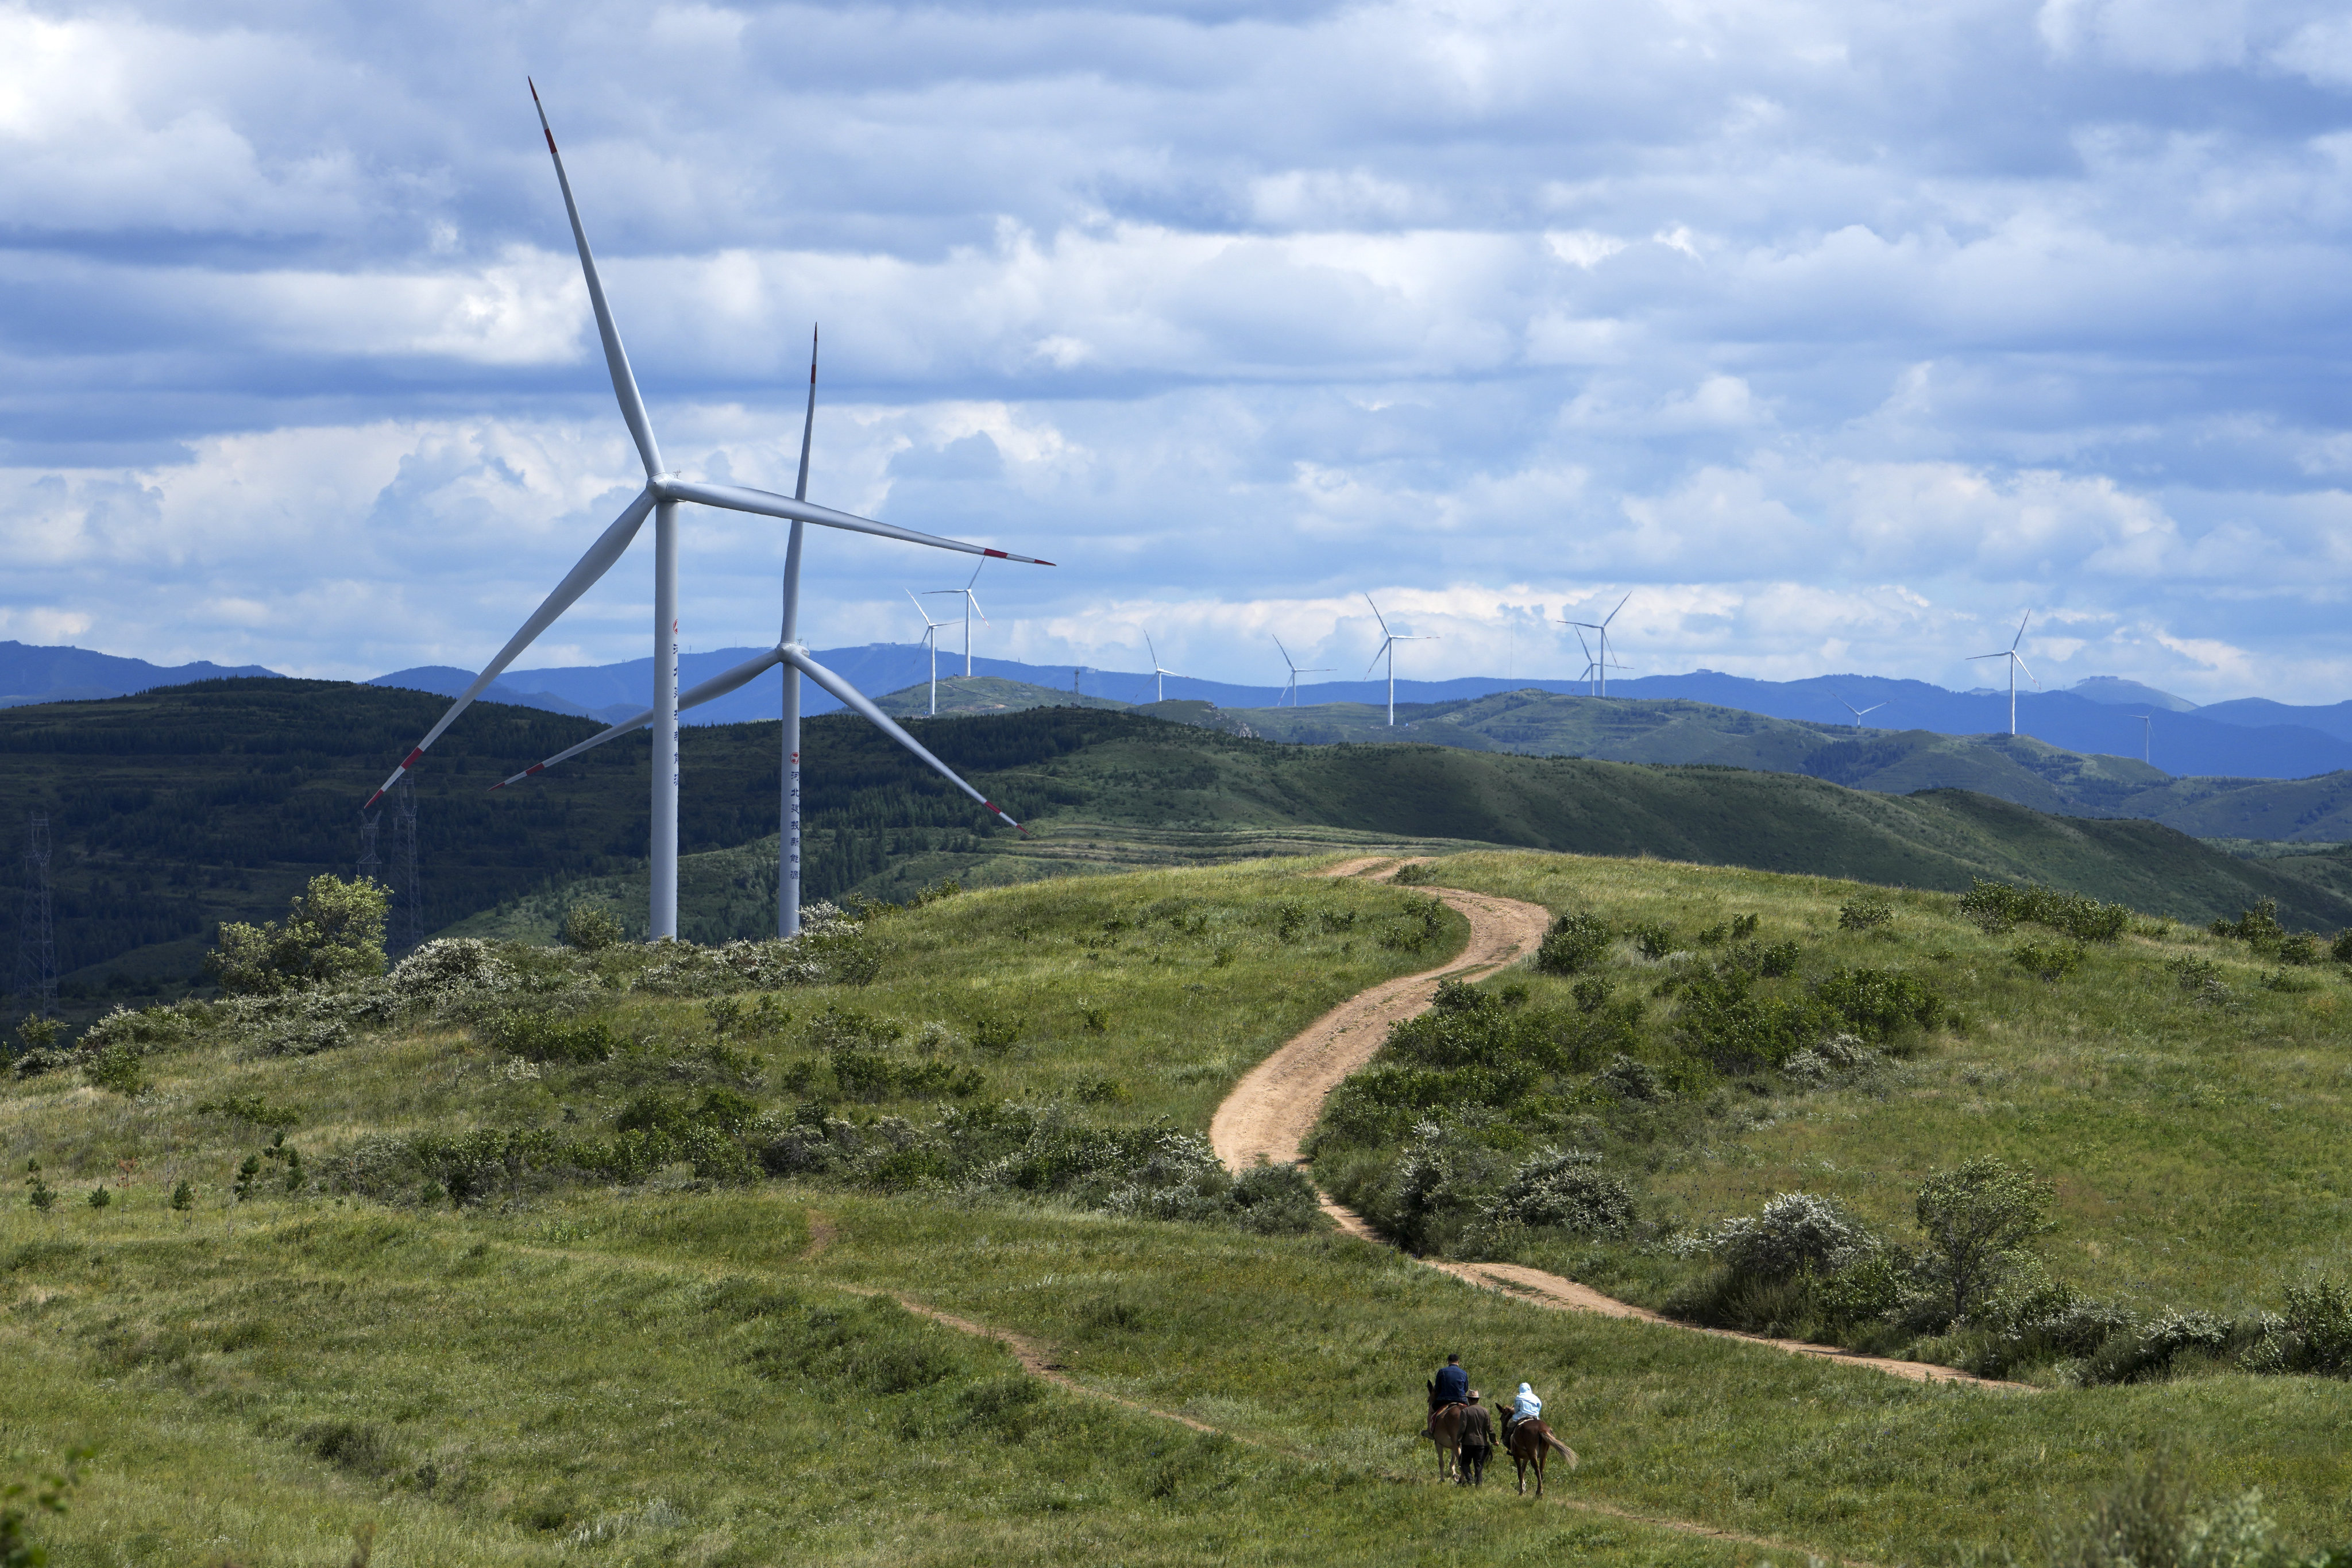 Tourists ride horses near wind turbines on the grassland in Zhangbei county, Hebei province, on August 15. China, currently the top emitter of greenhouse gases in the world, aims to reach net zero by 2060, requiring significant slashing of emissions. Photo: AP